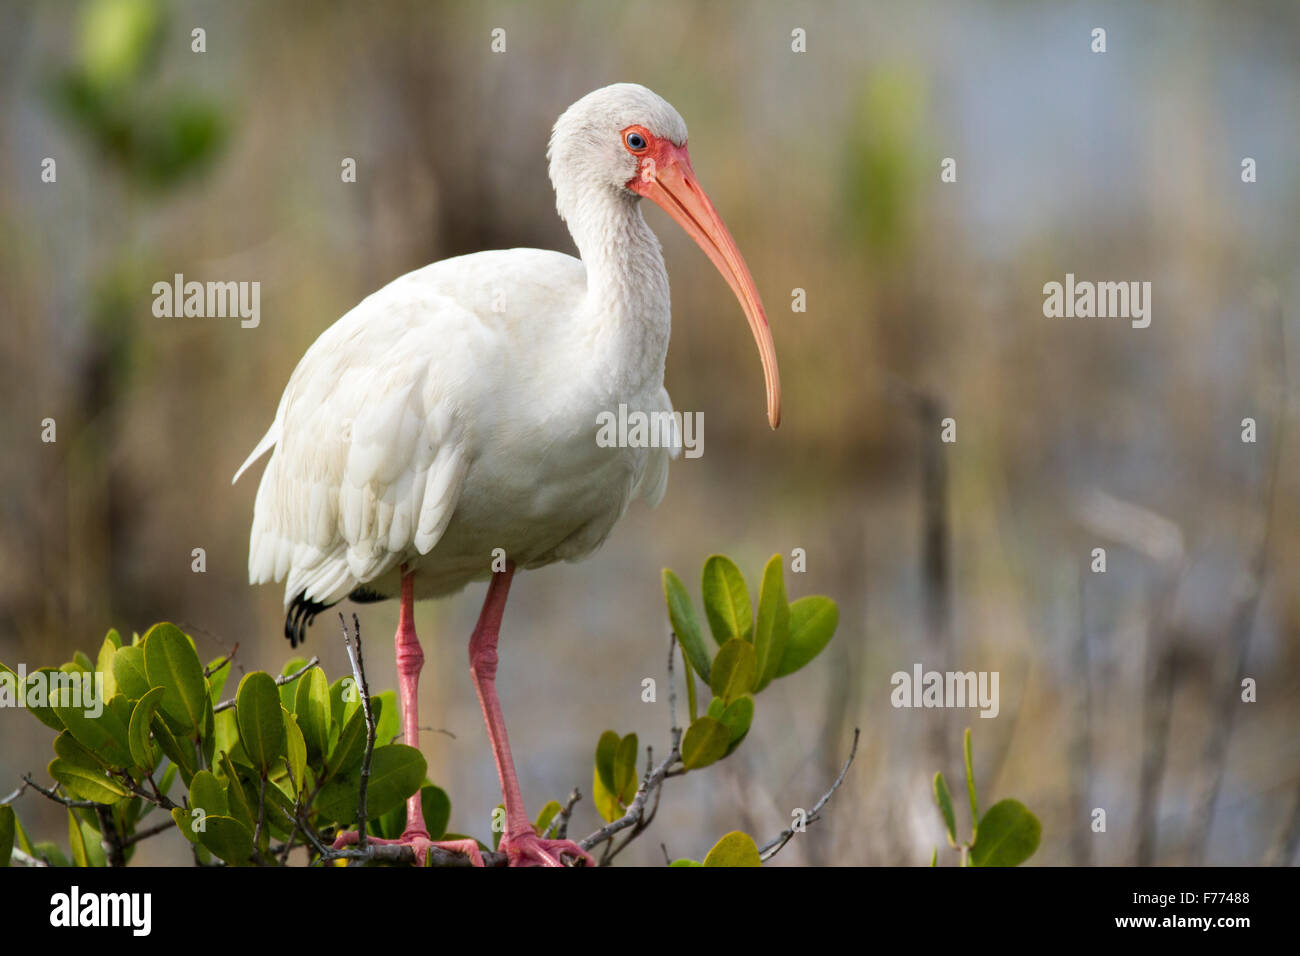 A white ibis perched on a shrub in a wetland in Florida. Stock Photo